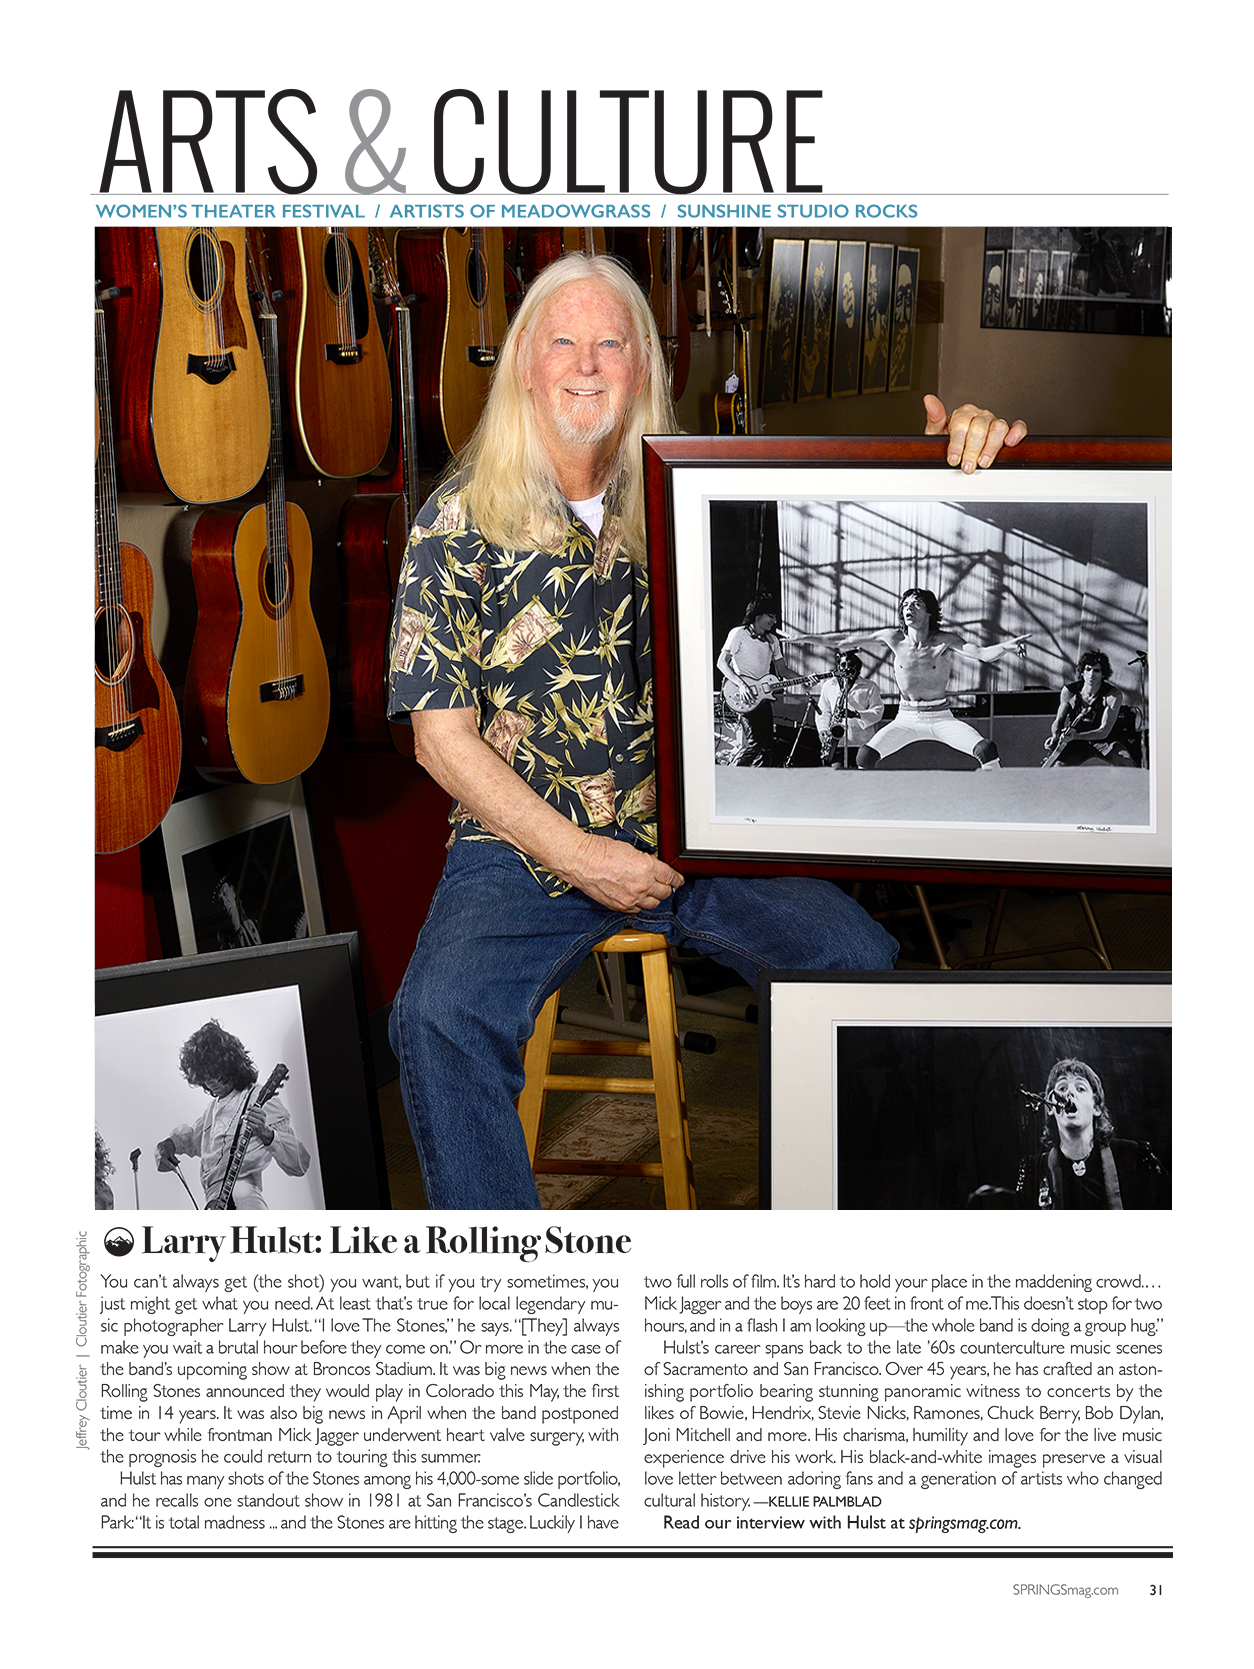 Springs Magazine featuring Larry Hulst